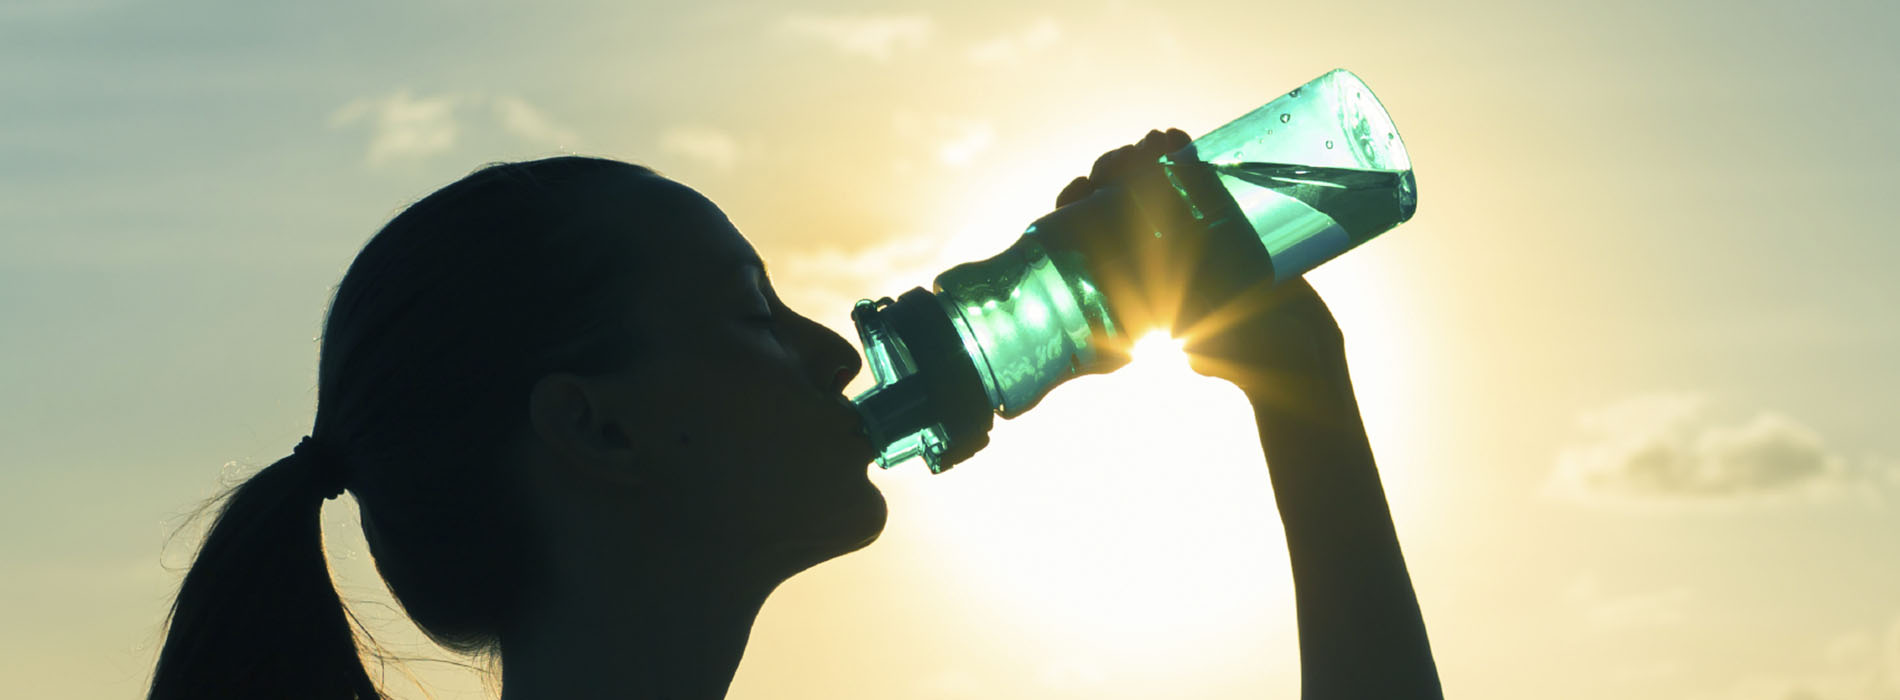 Silouette of a woman in profile drinking from a water bottle